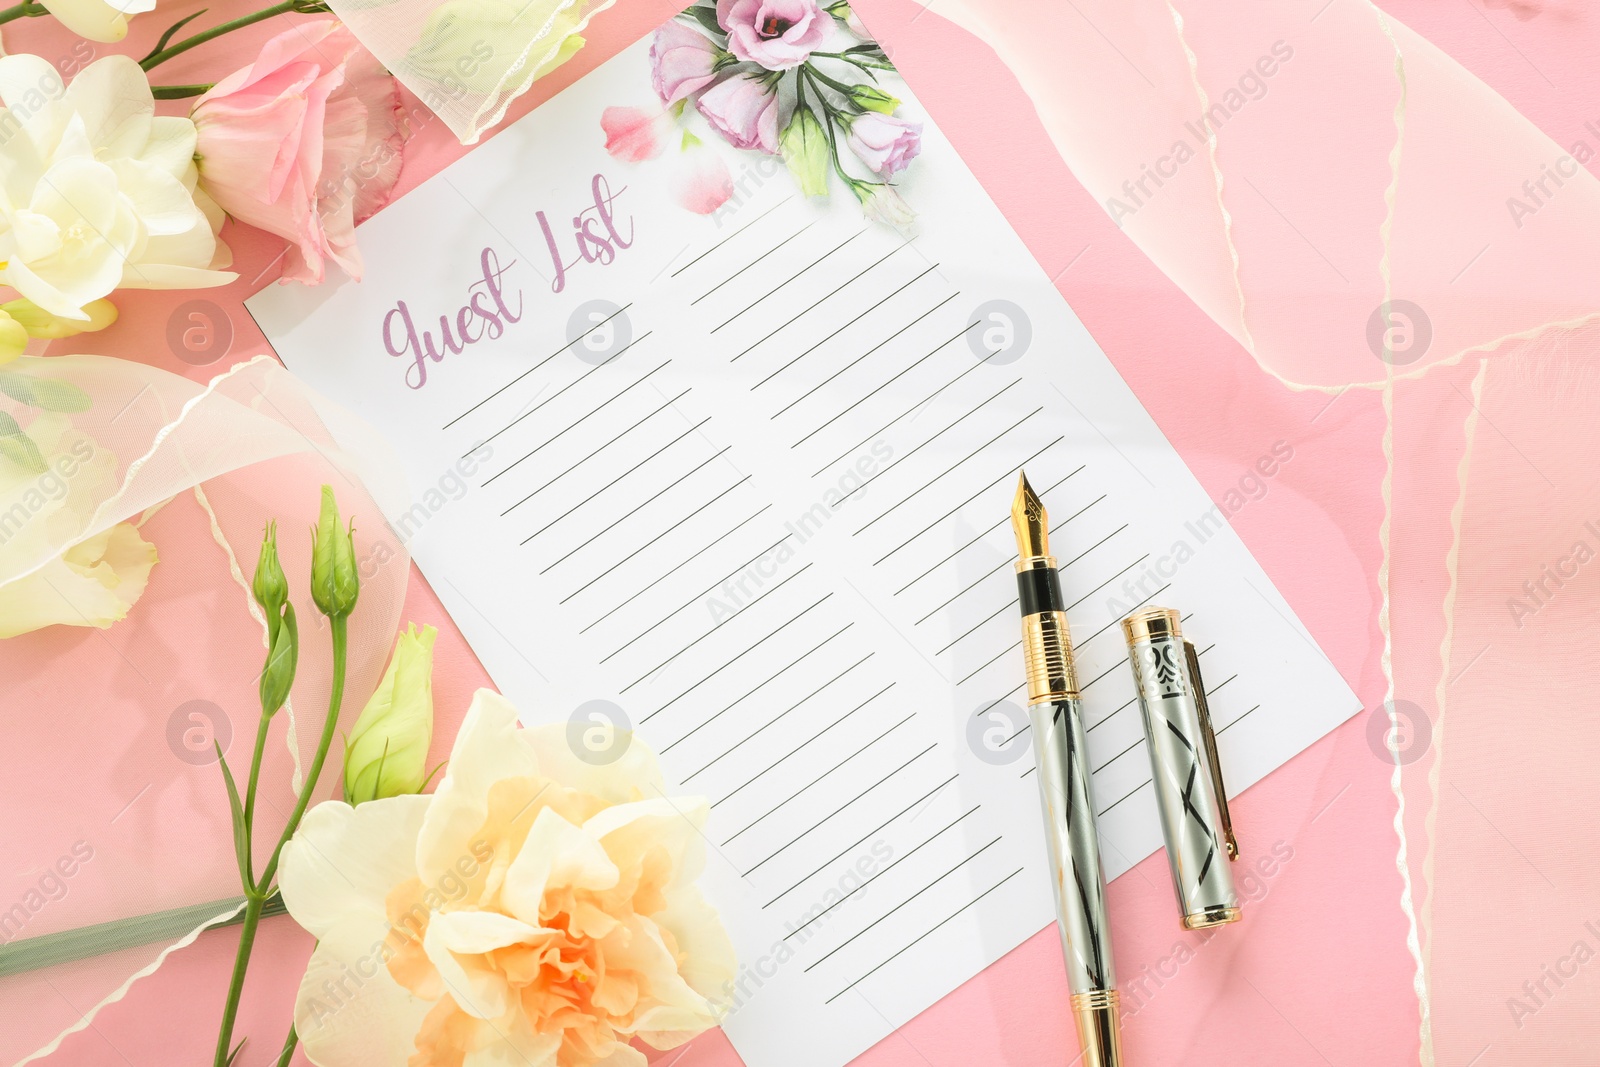 Photo of Guest list, pen, tulle fabric and beautiful flowers on pink background, flat lay. Space for text